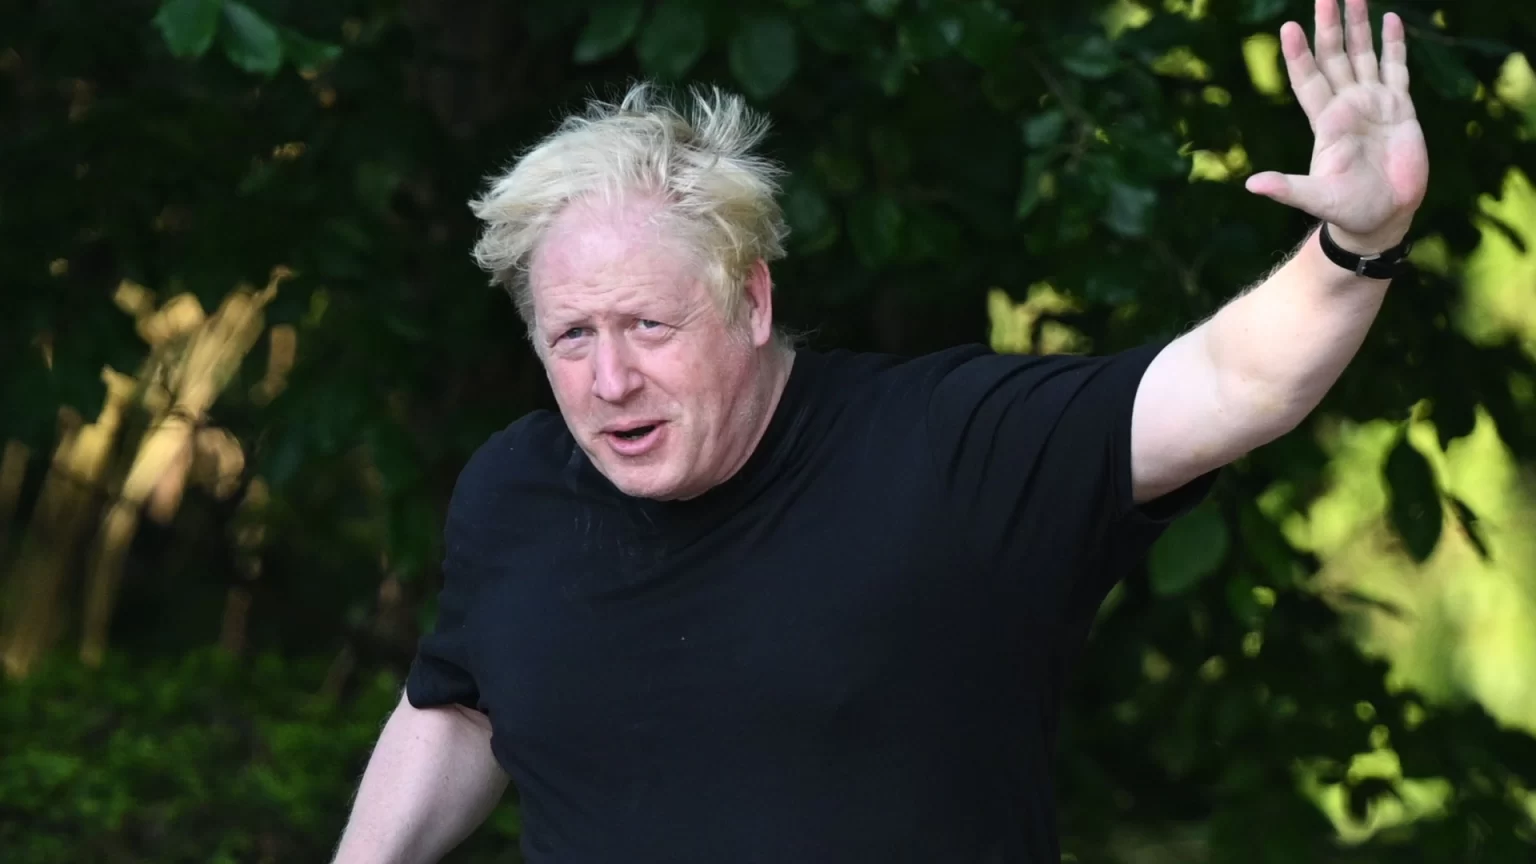 Imagine Boris Johnson with the populist appeal and none of the chaos? Now that would be worth voting for